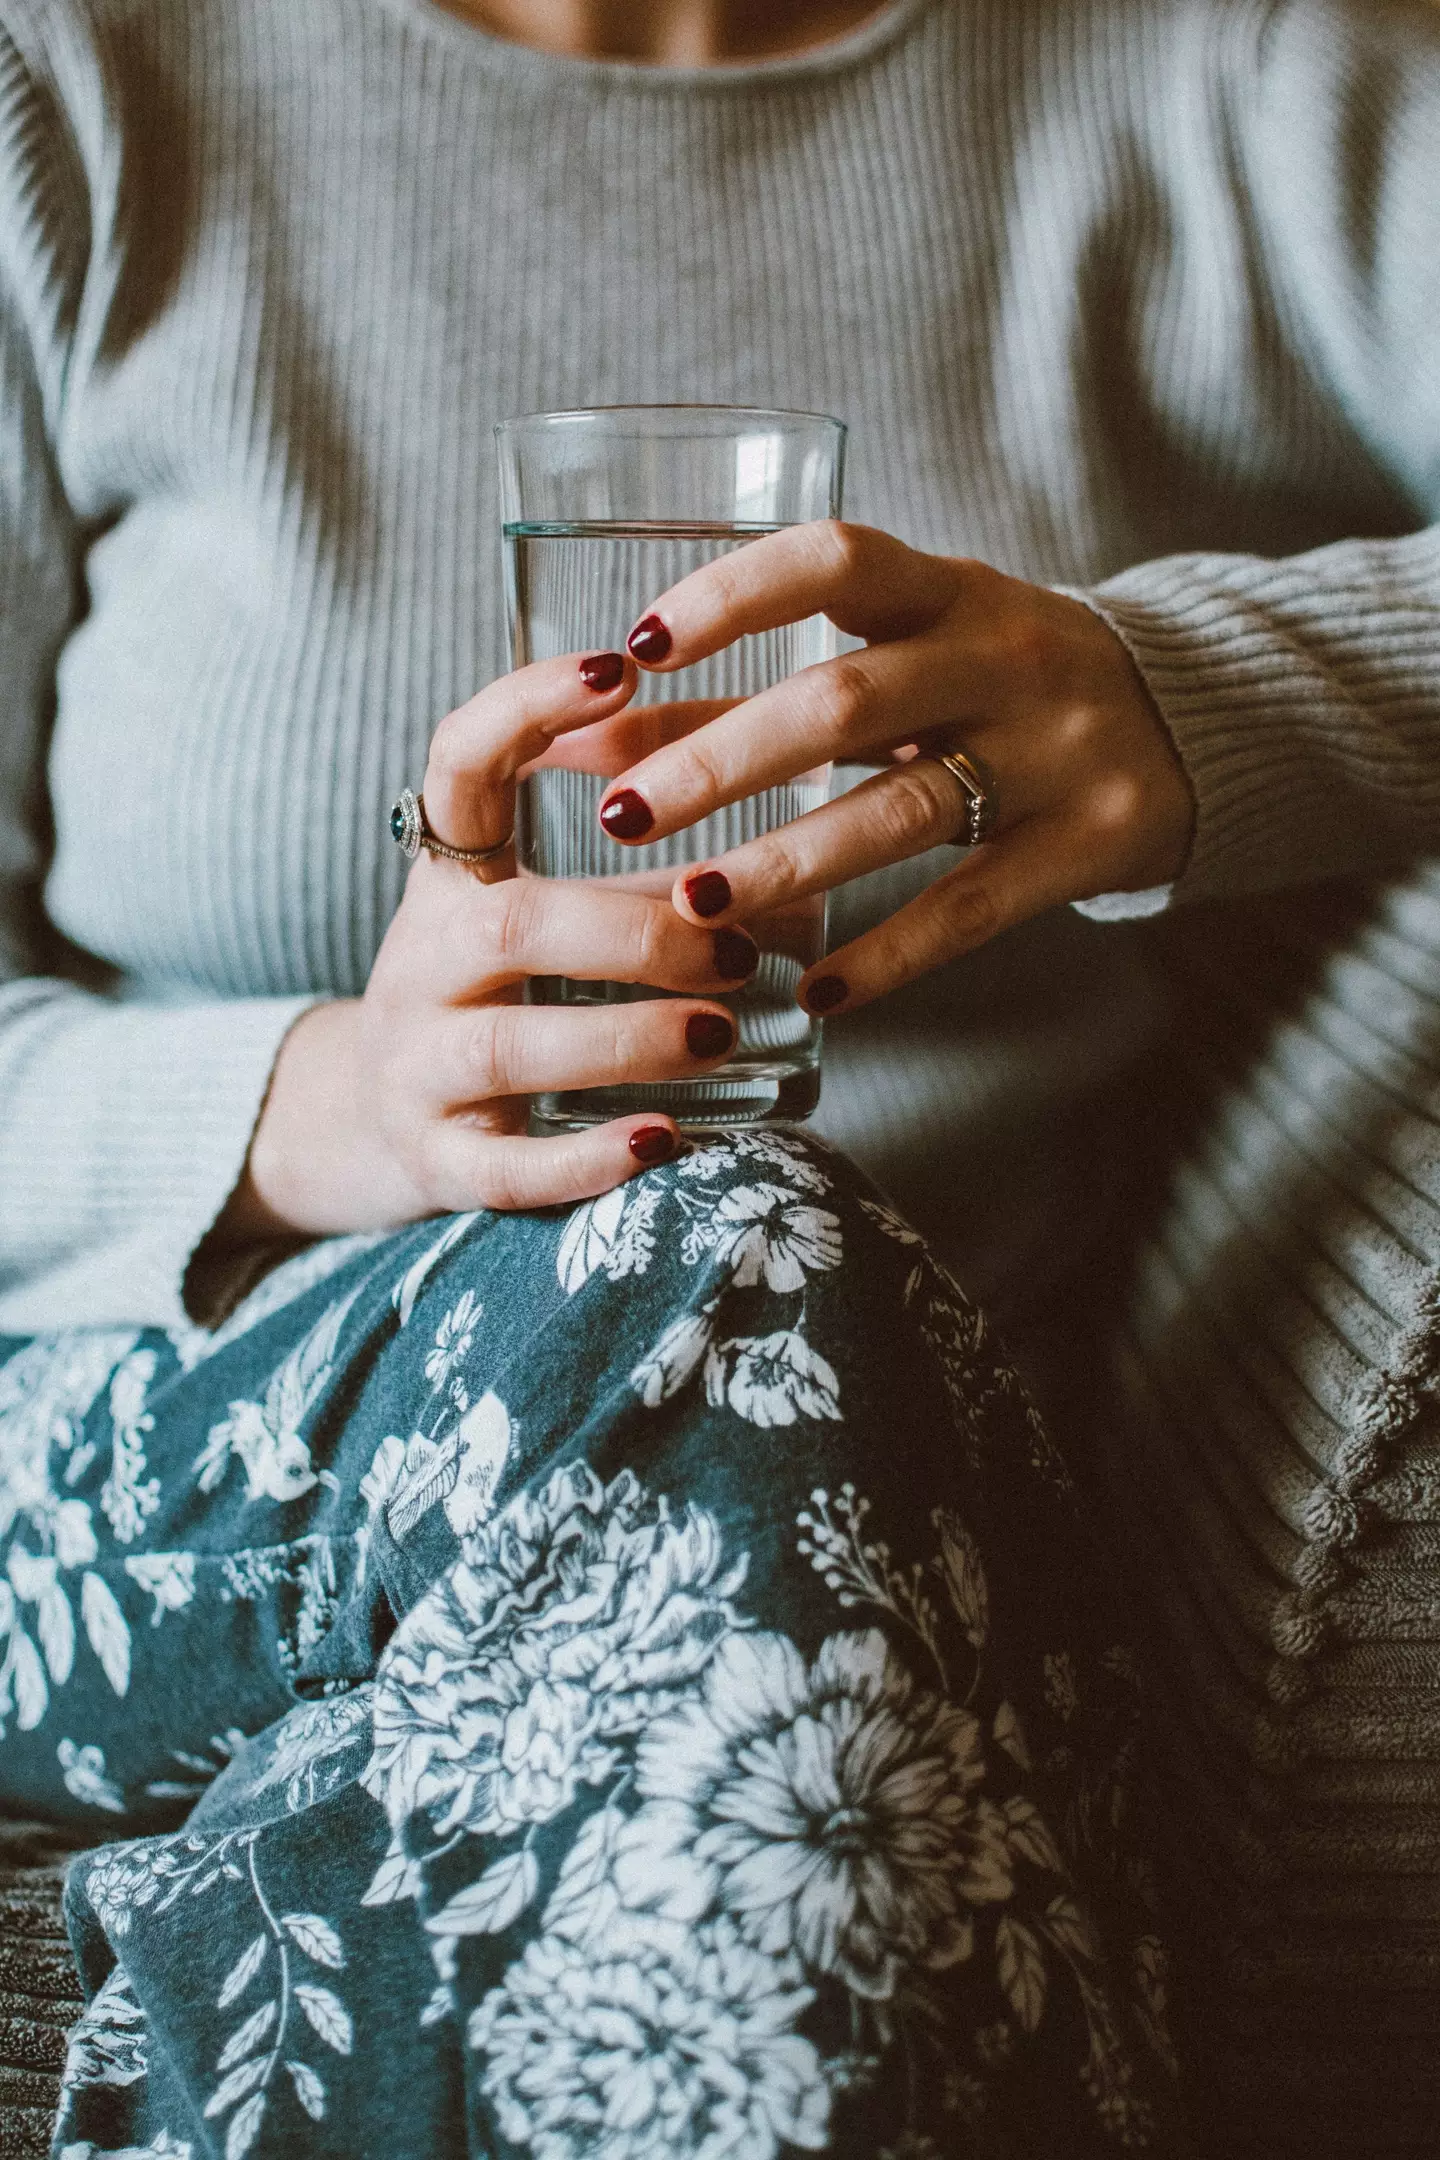 Drinking too much water can be bad for your health. Credit Pexels